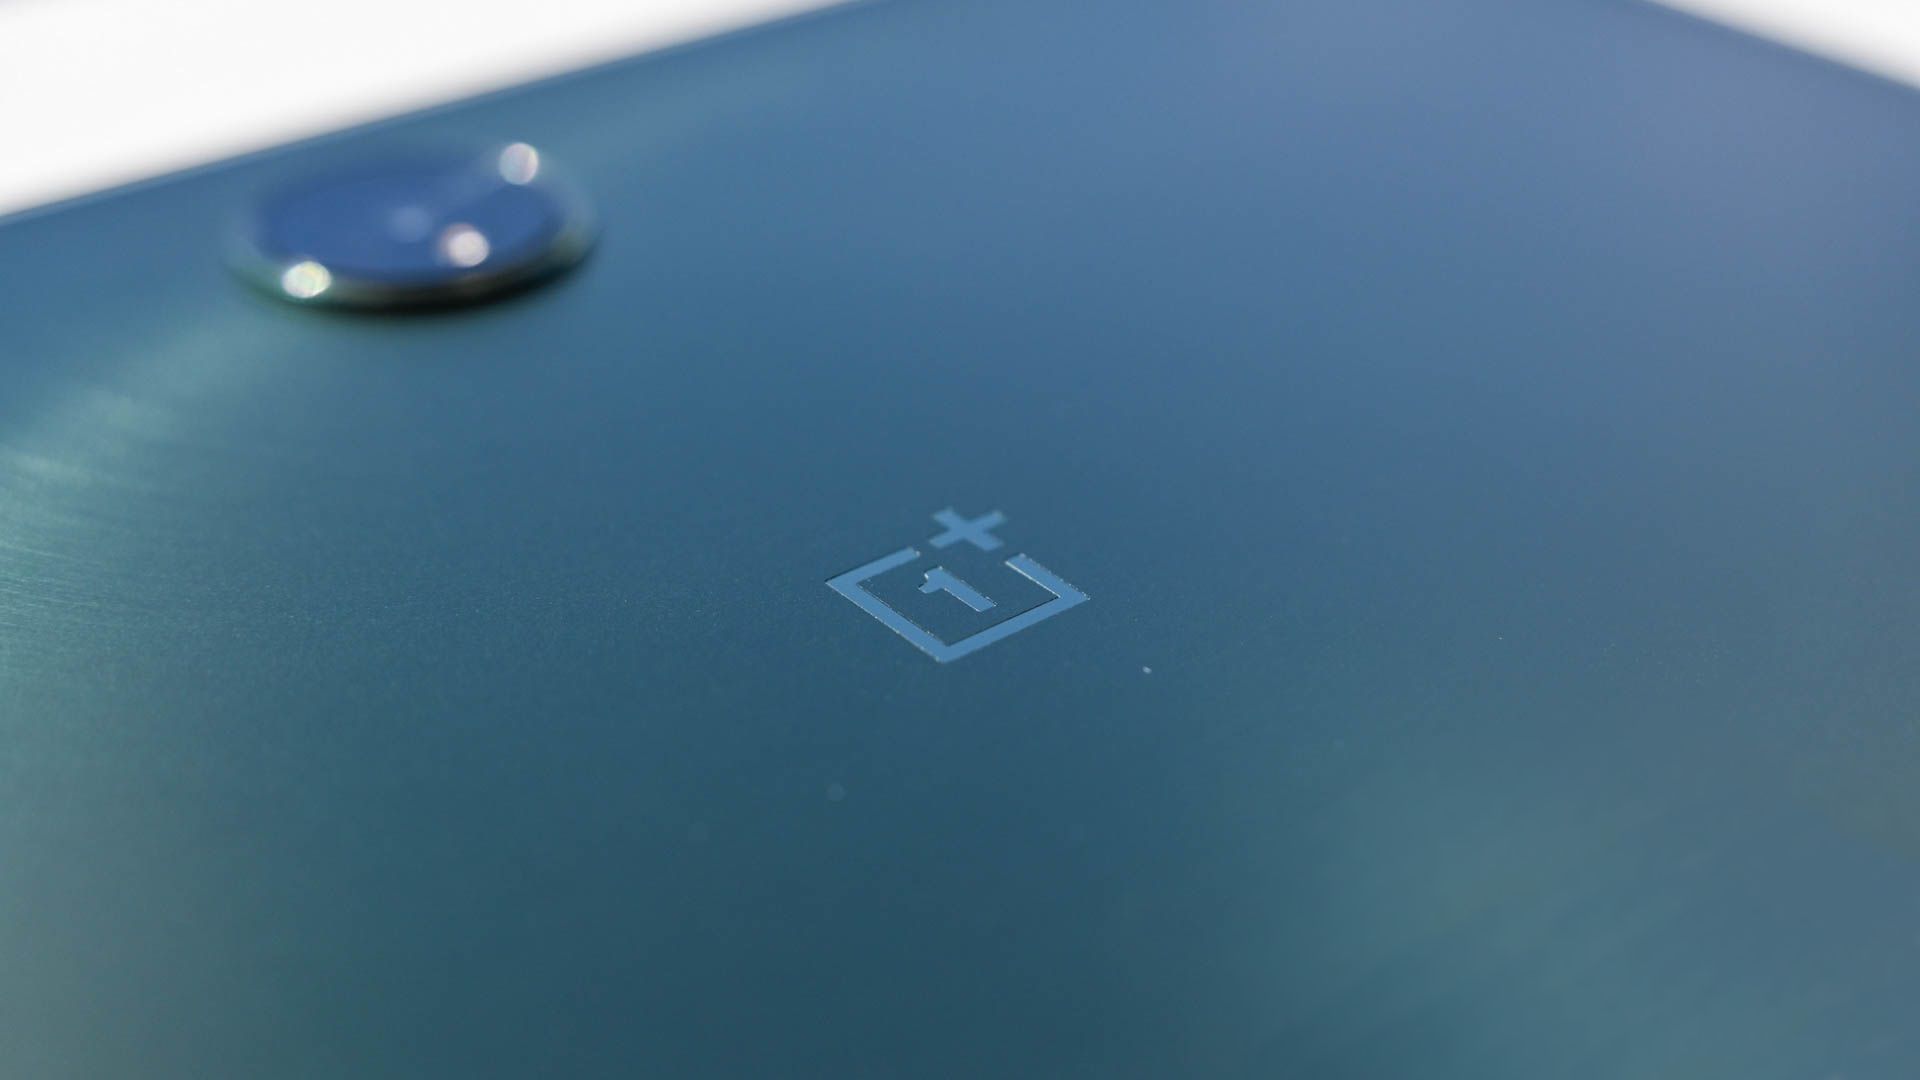 OnePlus Pad hands-on: A solid first attempt